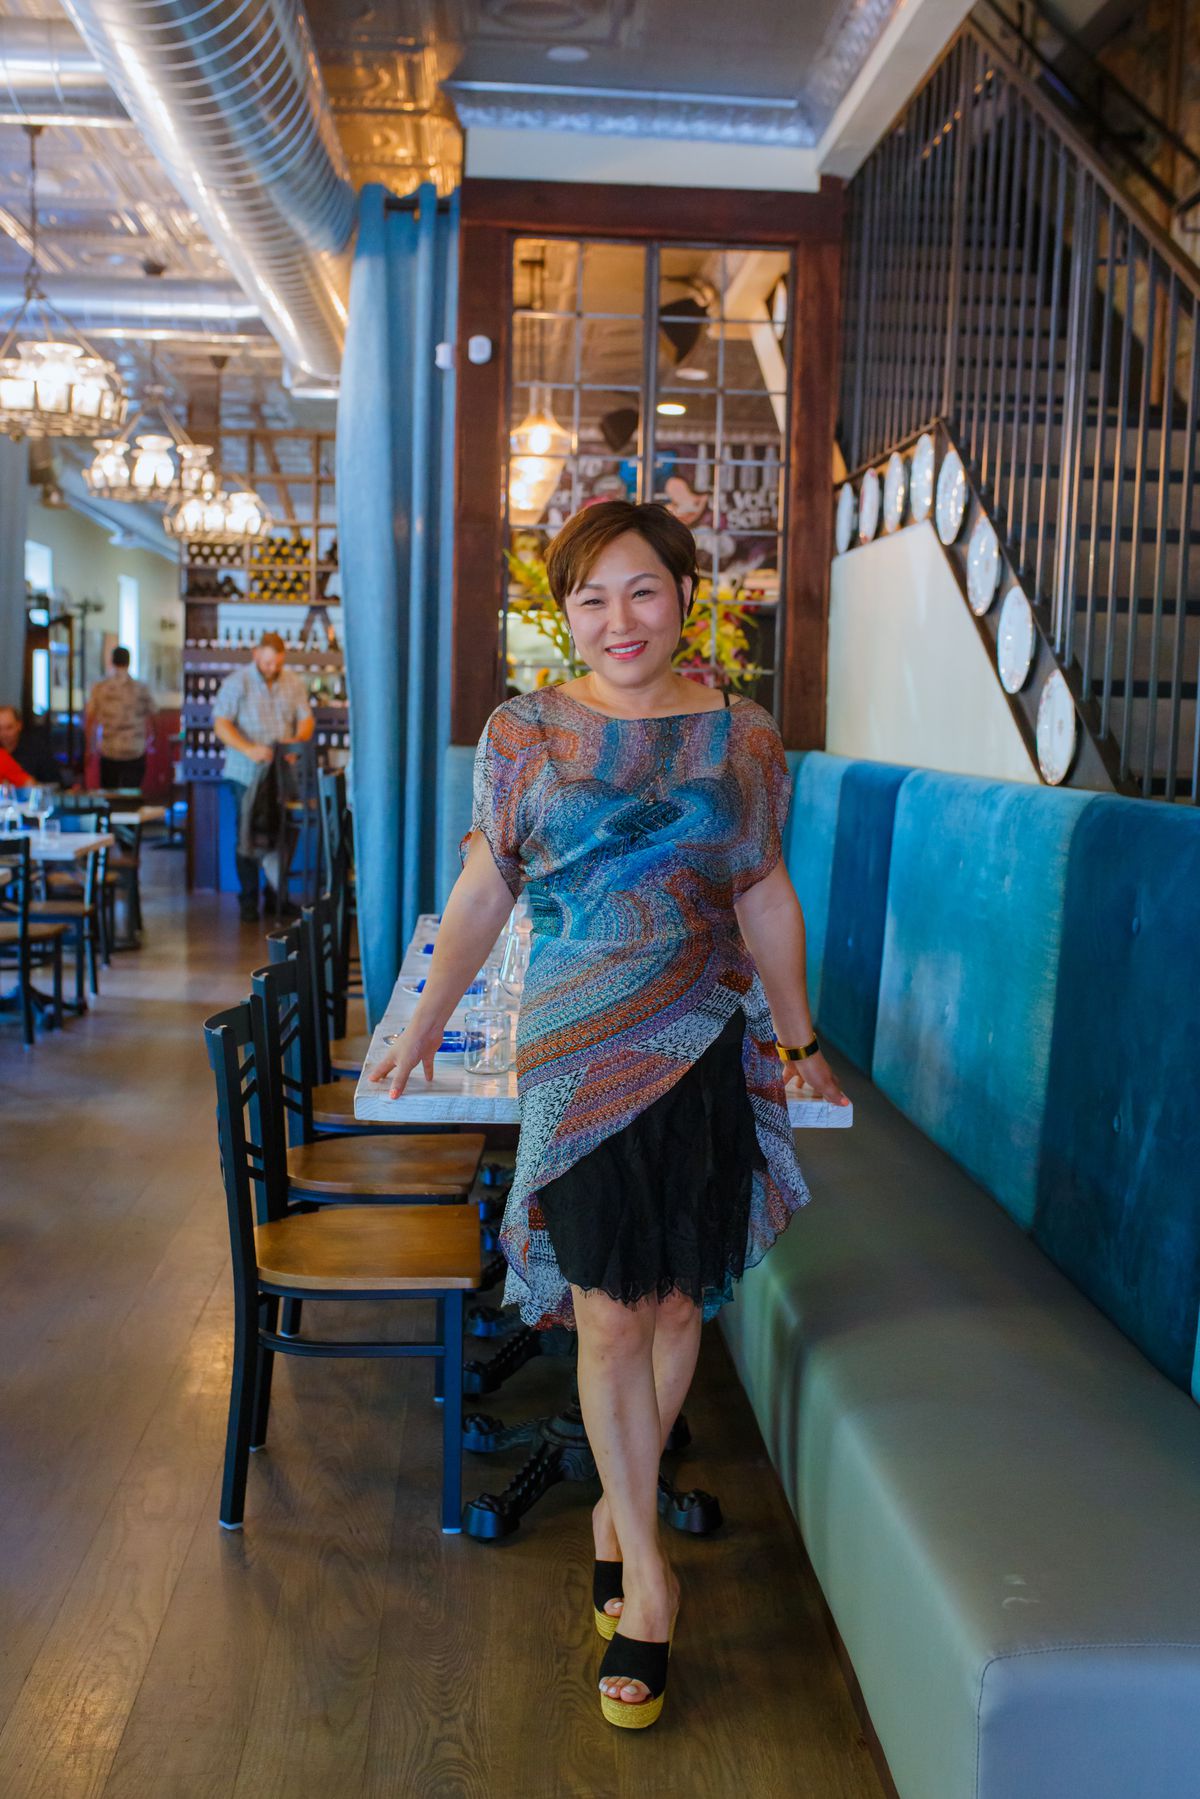 A woman in a colorful dress stands inside a restaurant with wooden floors.